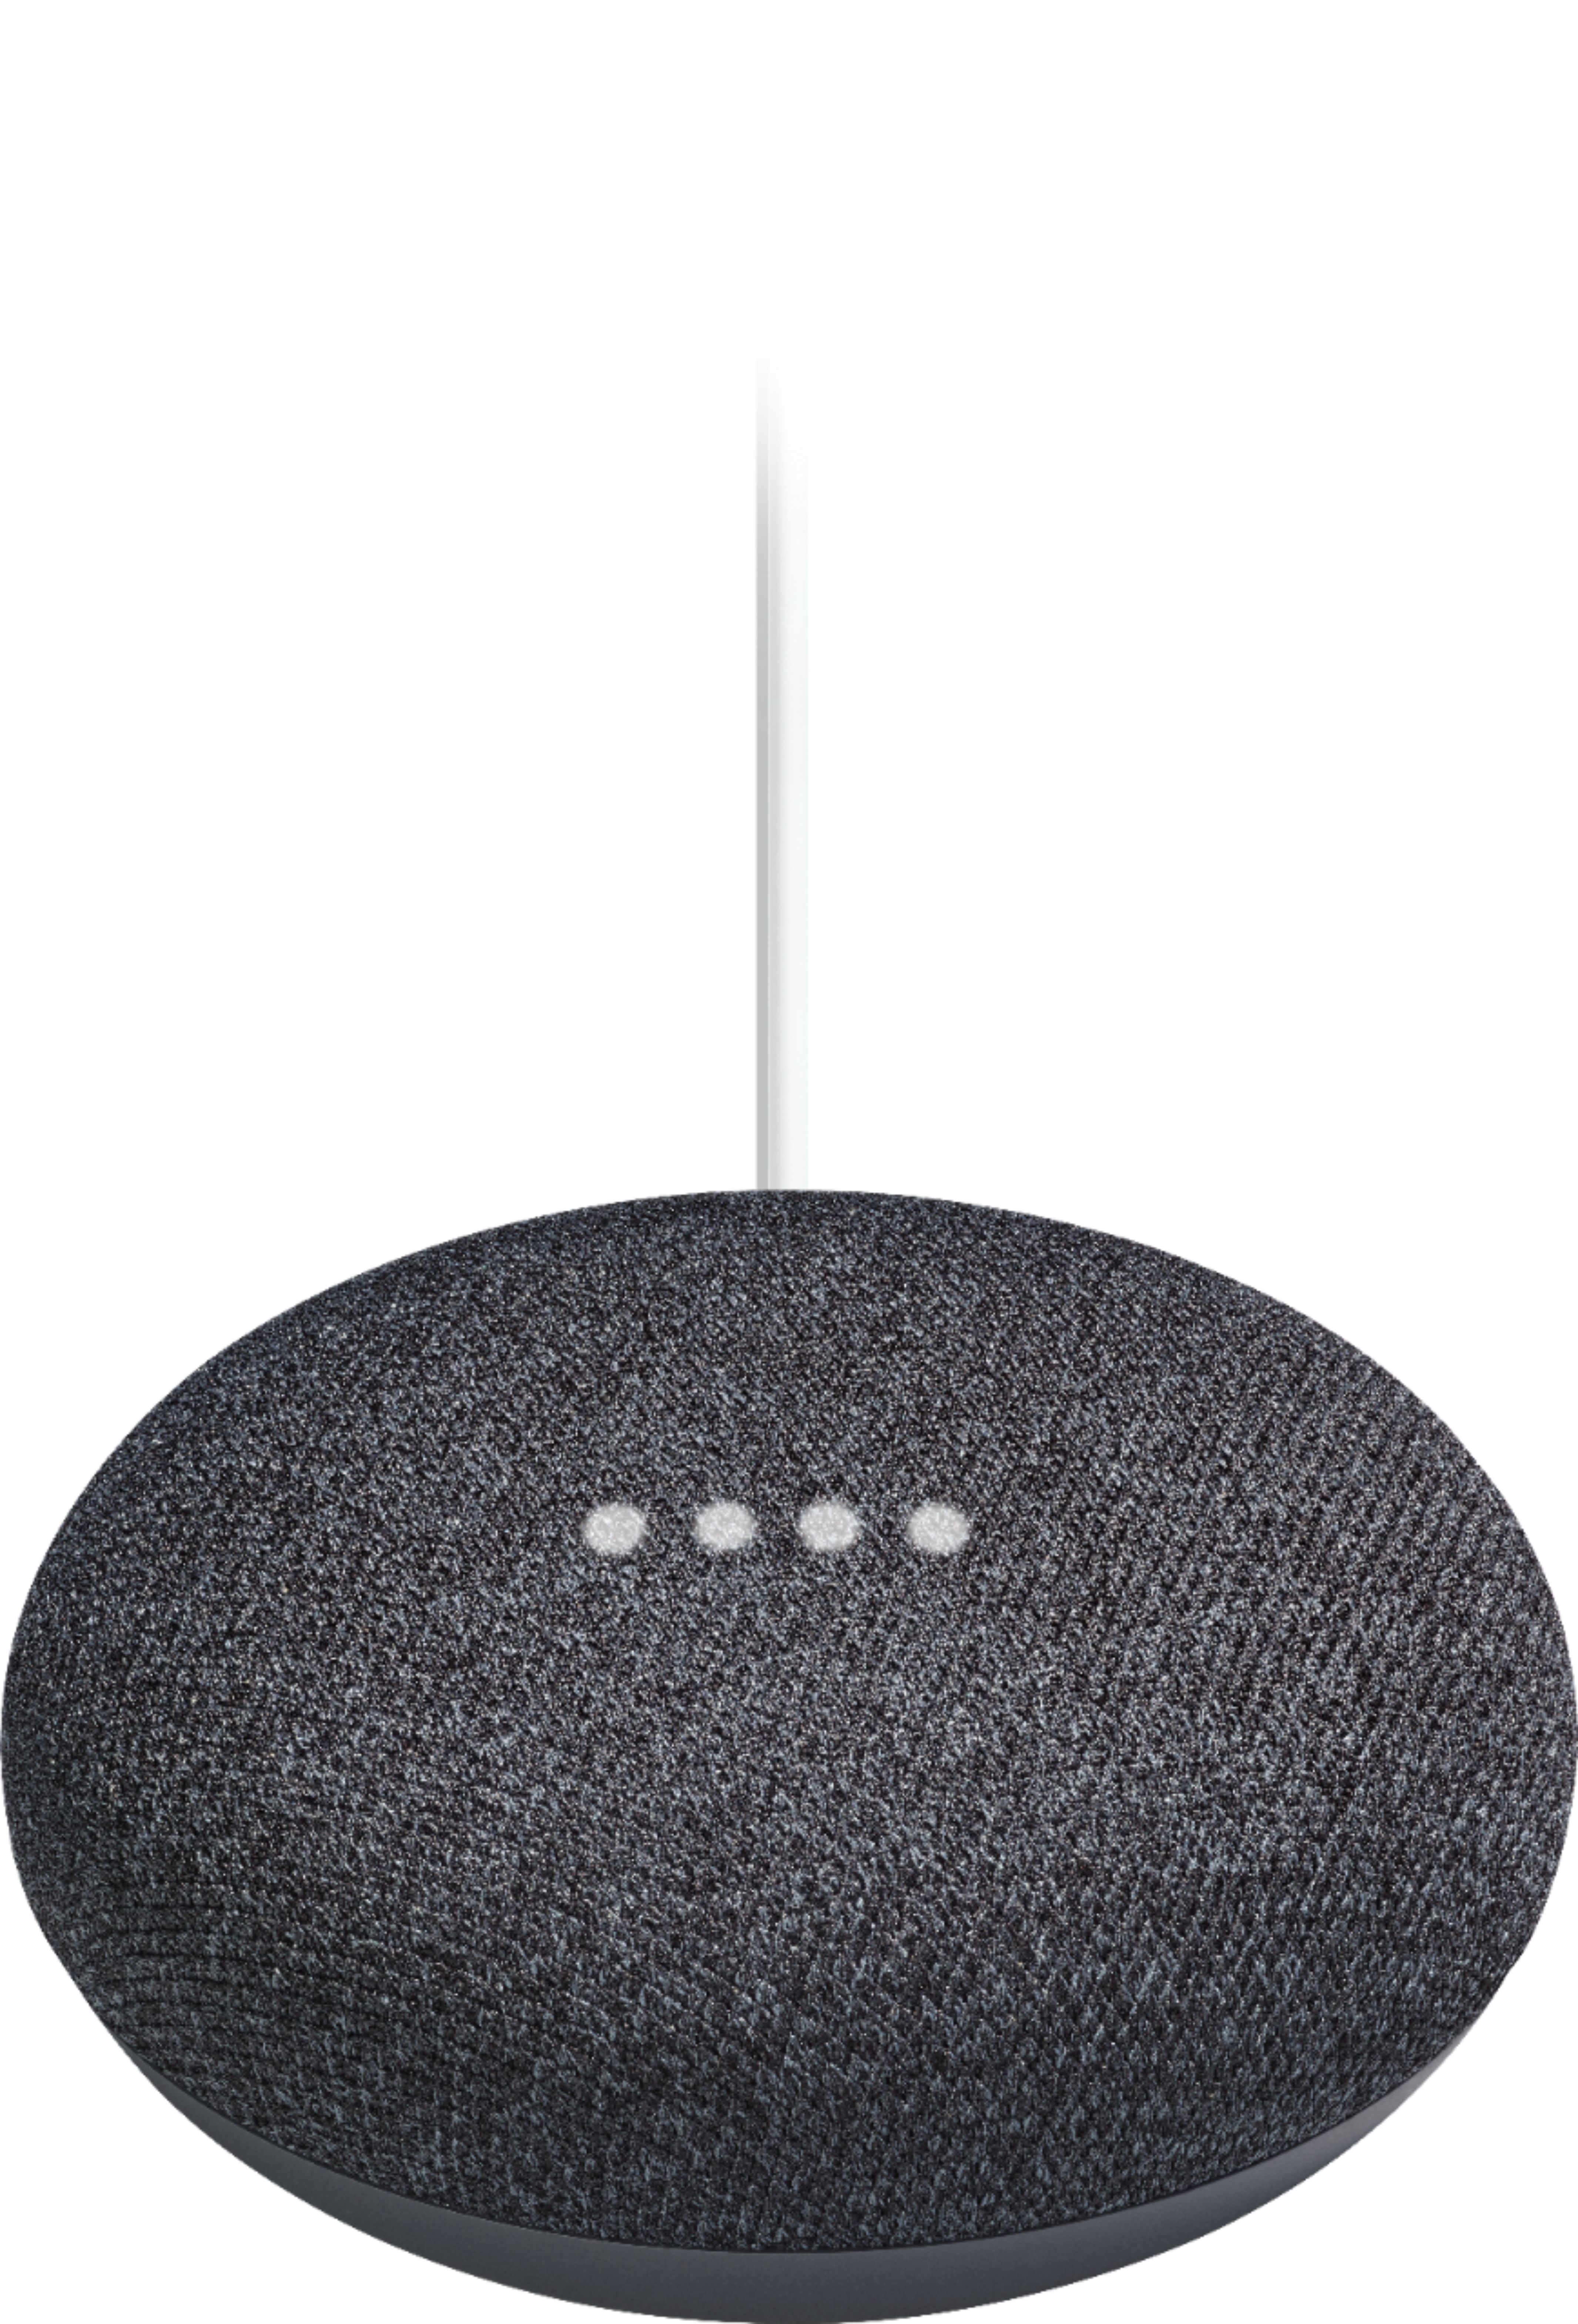 Home Mini 1st Generation Smart Speaker With Google Assistant Charcoal Ga Us Best Buy